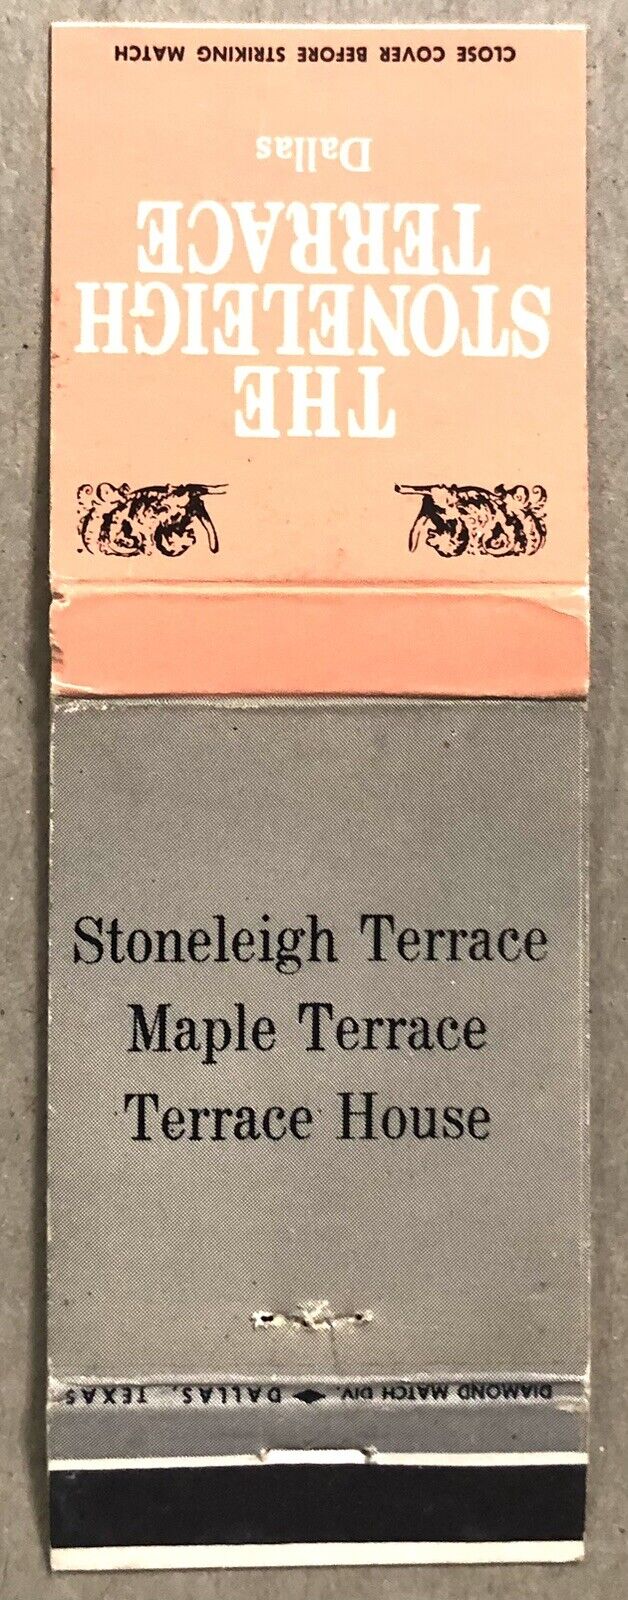 Vintage Front 20 Strike Matchbook Cover - The Stoneleigh Terrace Dallas, TX